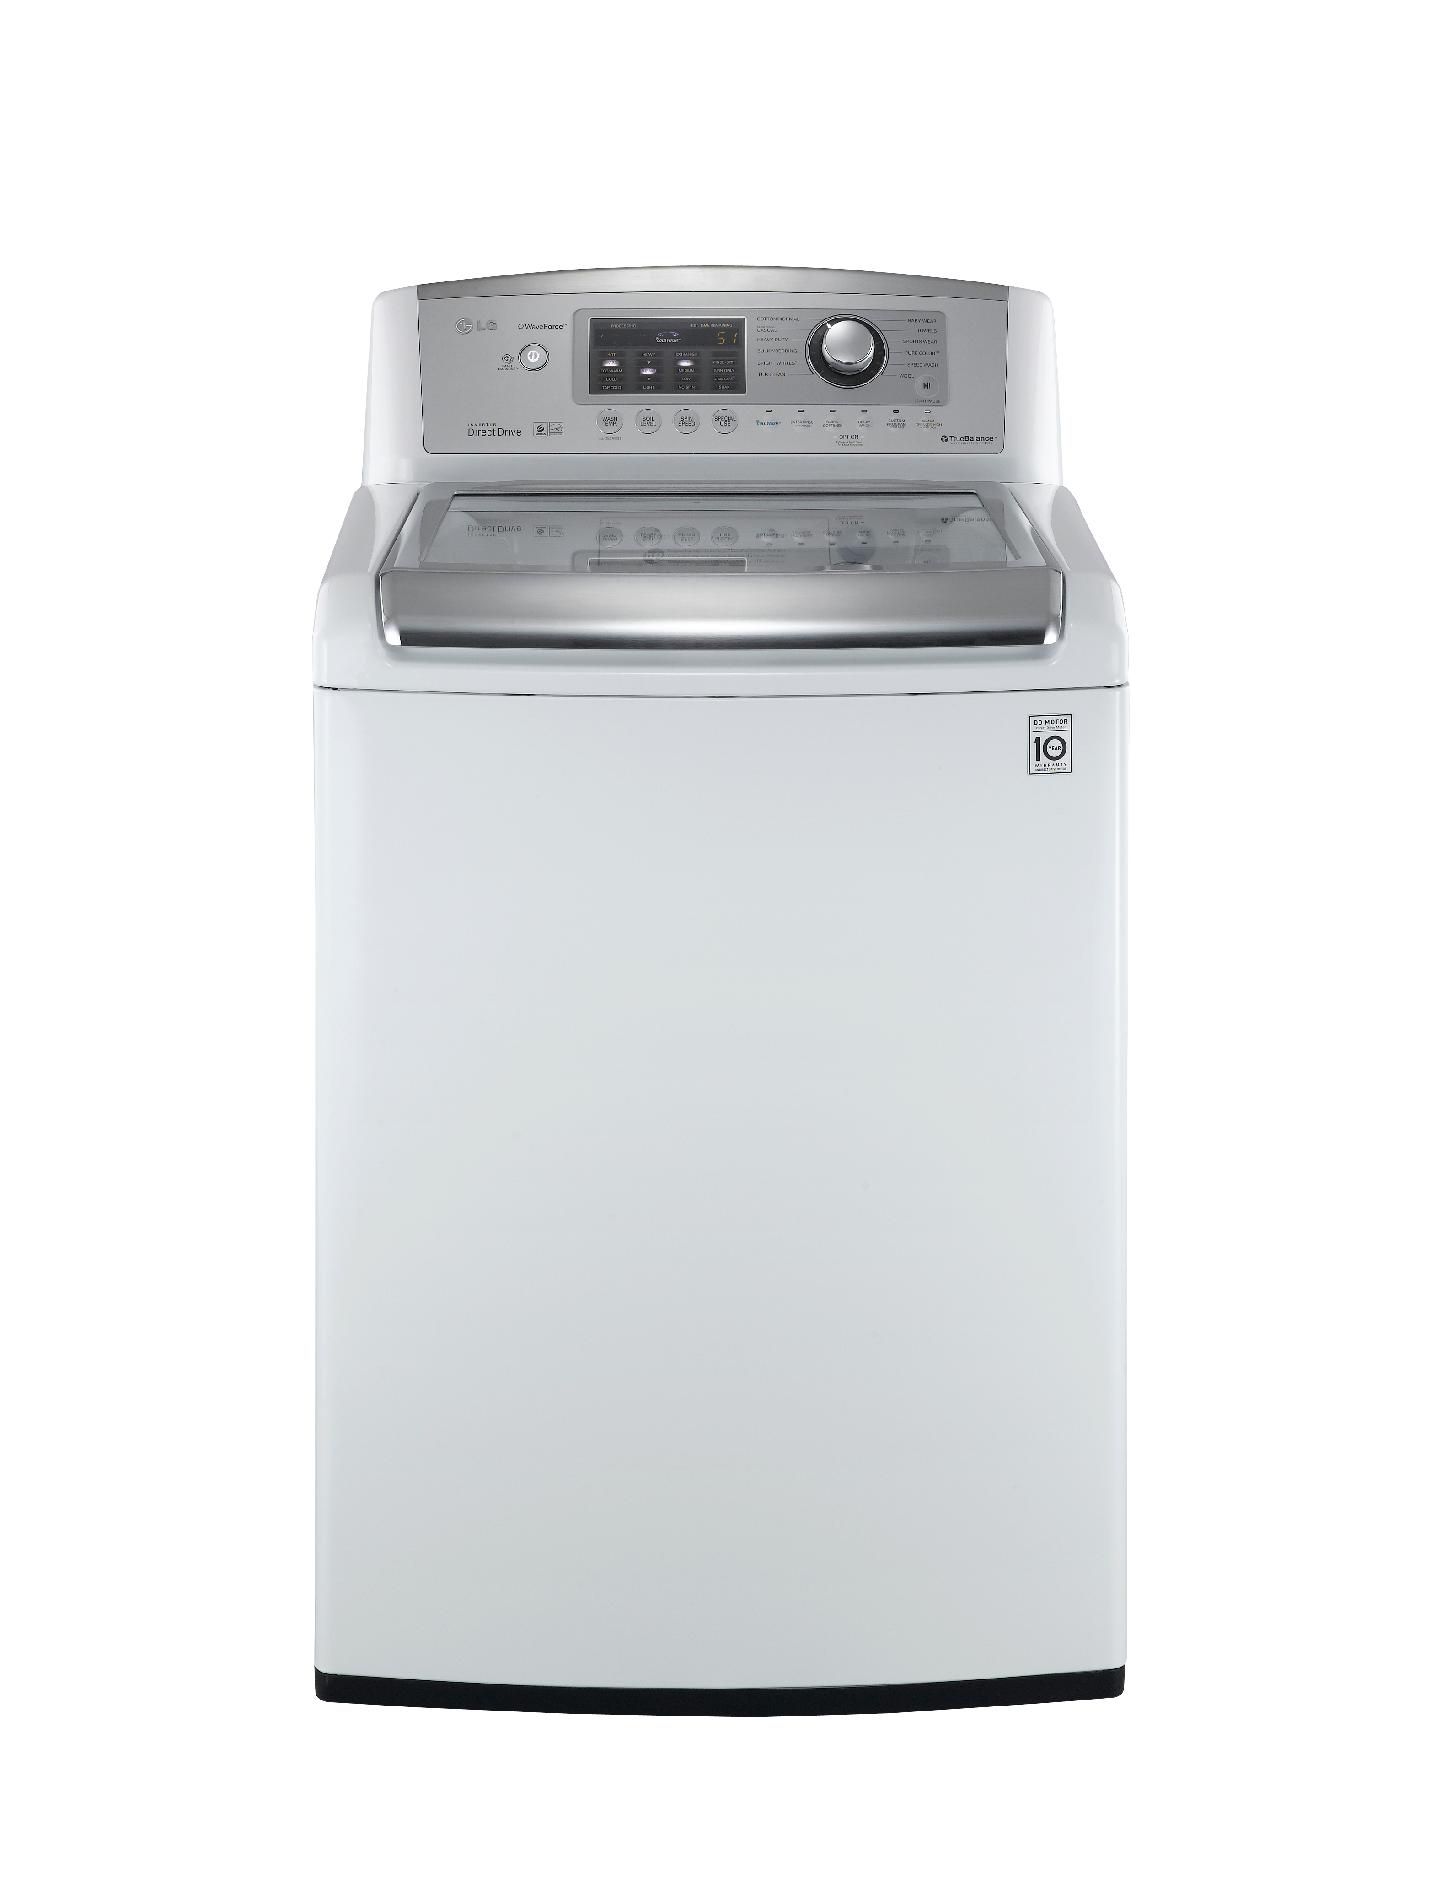 LG 4.7 cu. ft. High-Efficiency Top-Load Washer - White 4.6 cu.ft. and greater